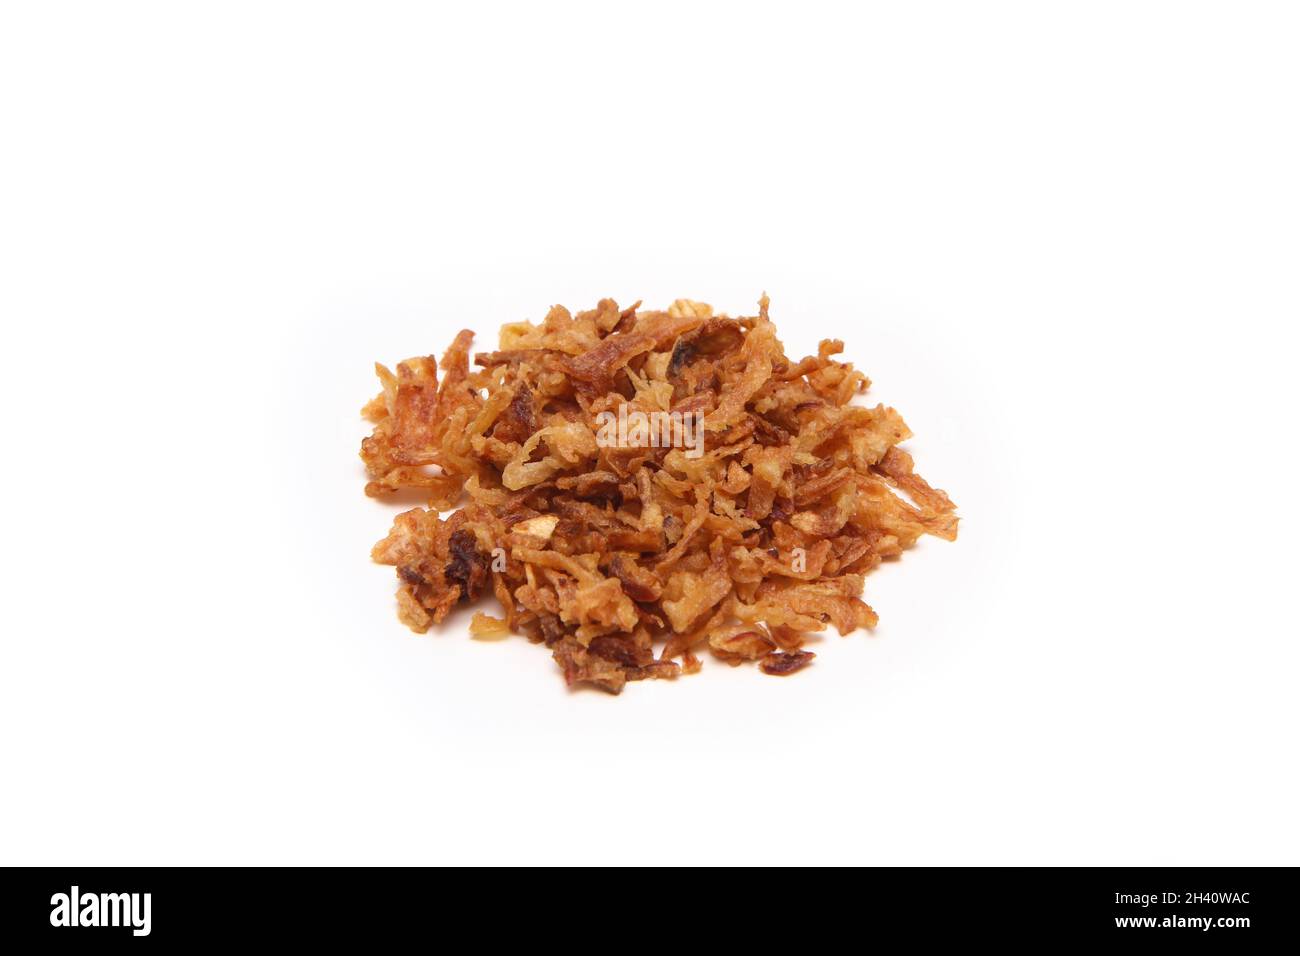 The small pile of deep fried onion, the great topping on hot dogs or other dishes. Stock Photo